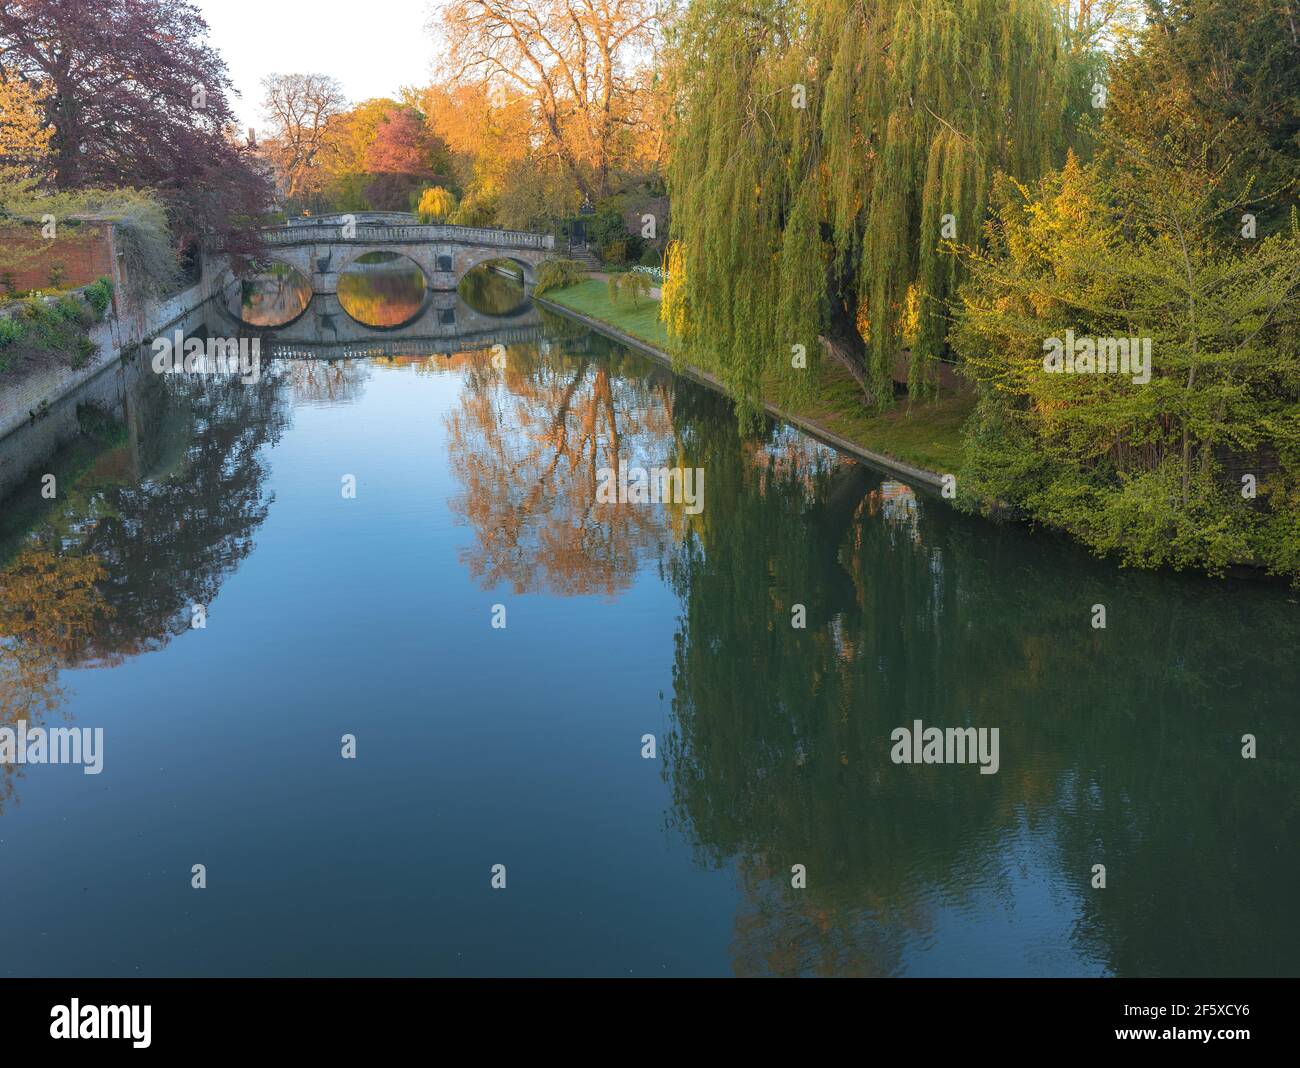 Clare college Bridge across the River Cam with reflections in Cambridge England Stock Photo